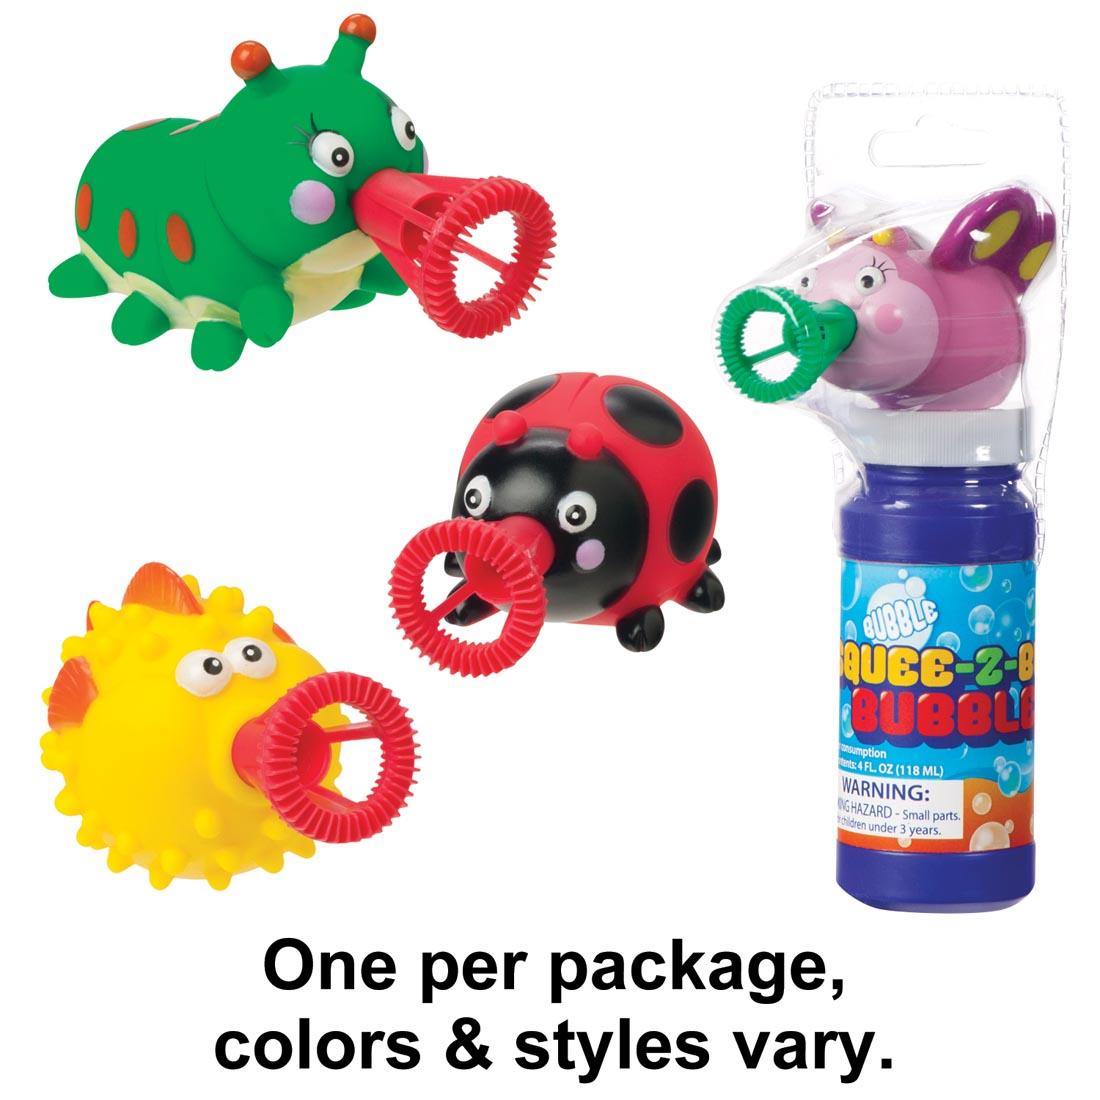 A bottle of bubbles shown with four different Mini Squee-Z-Bubs Bubbles toppers with the text One per package, colors & styles vary.